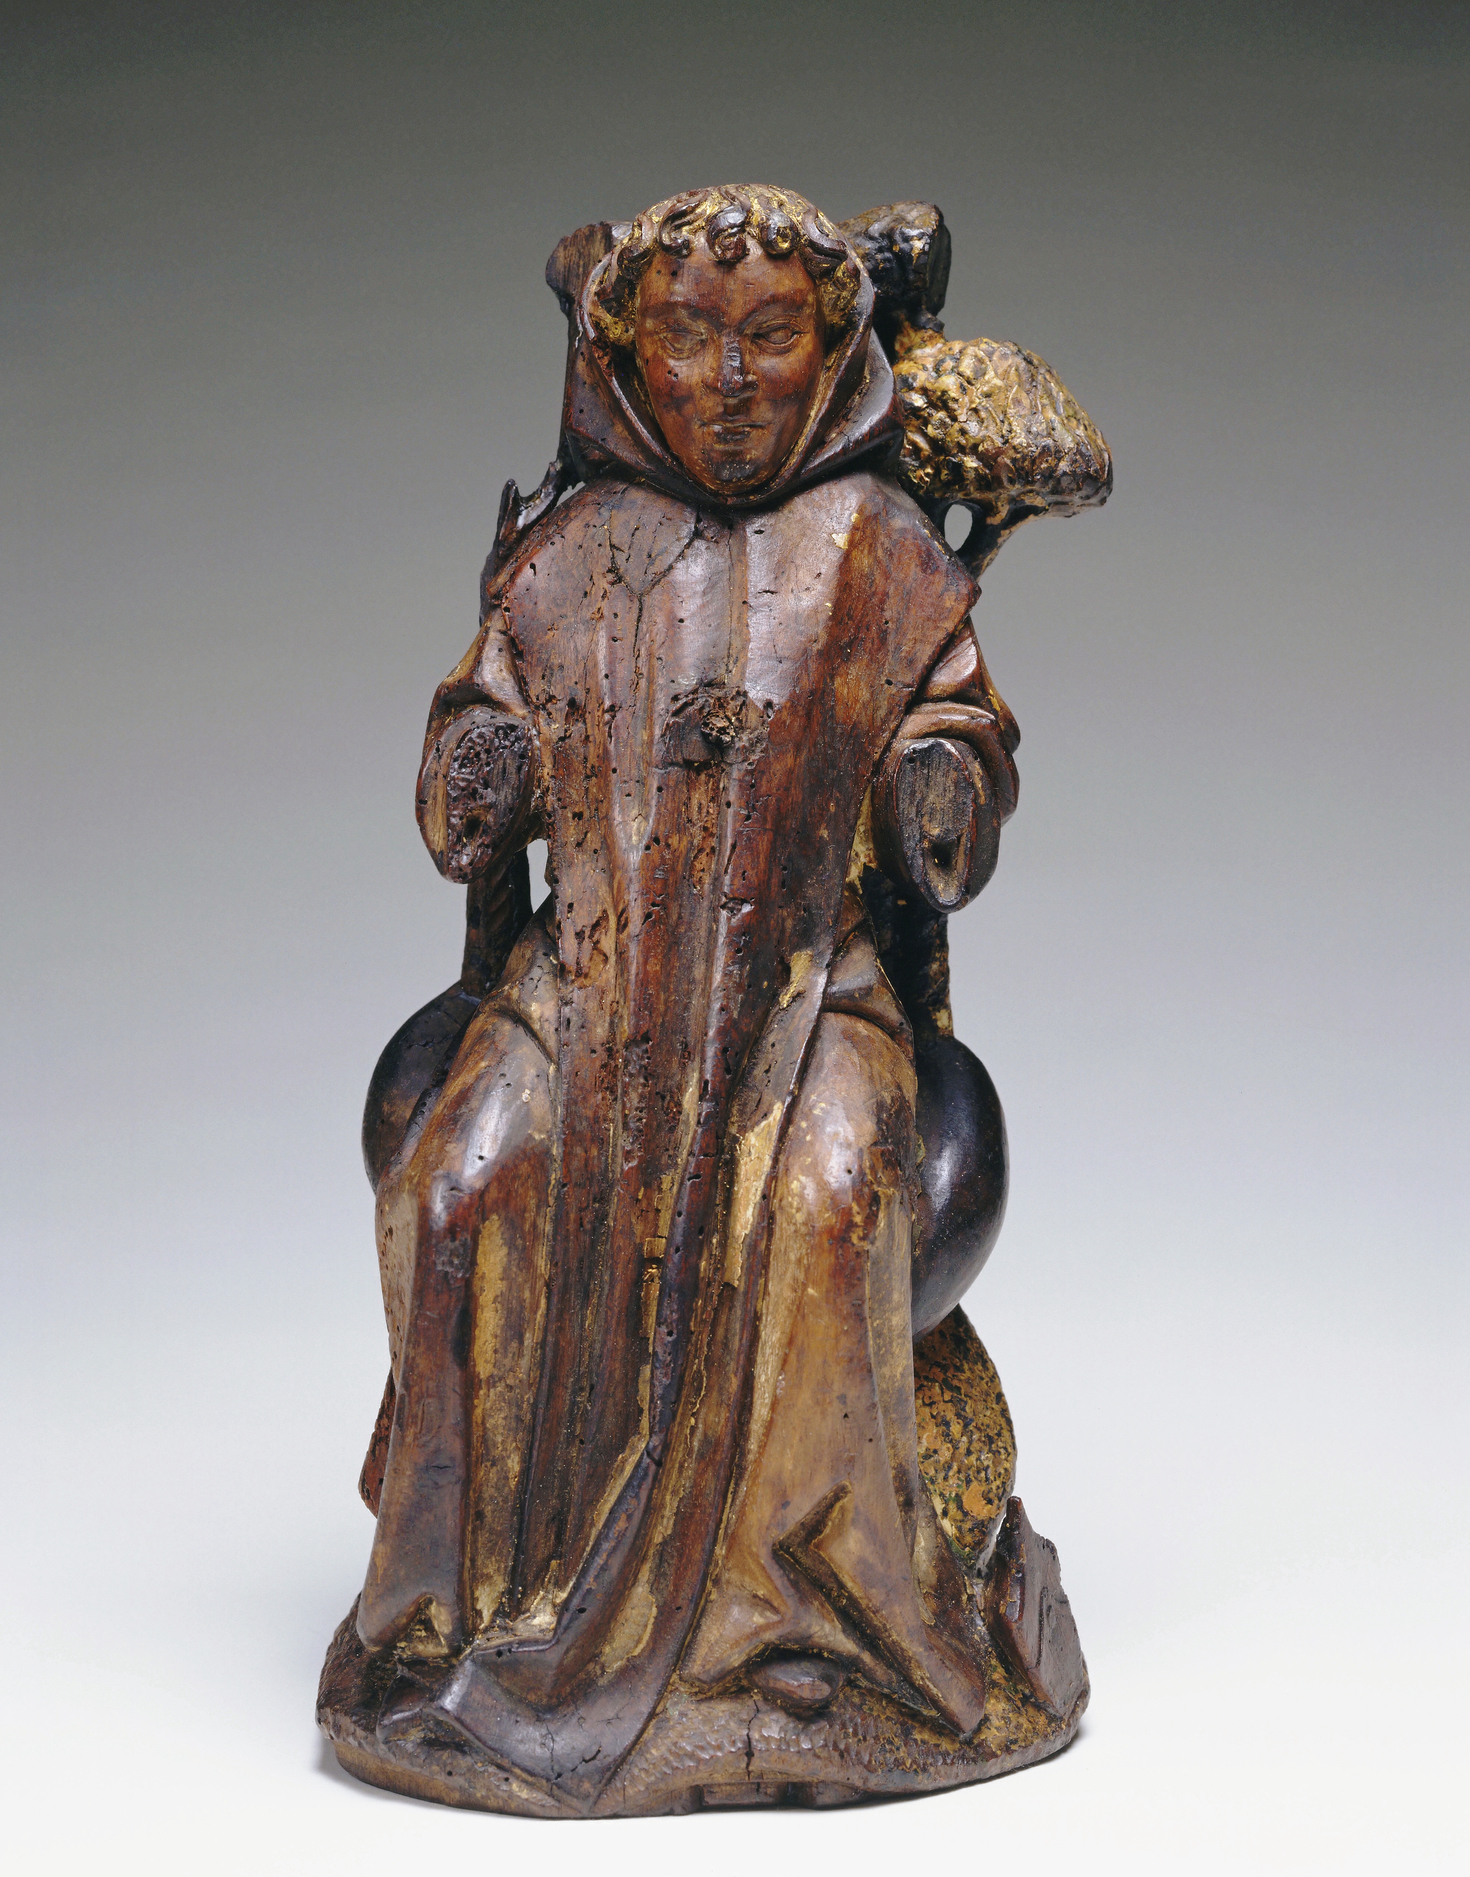 Walnut wood carved sculpture of a French Saint